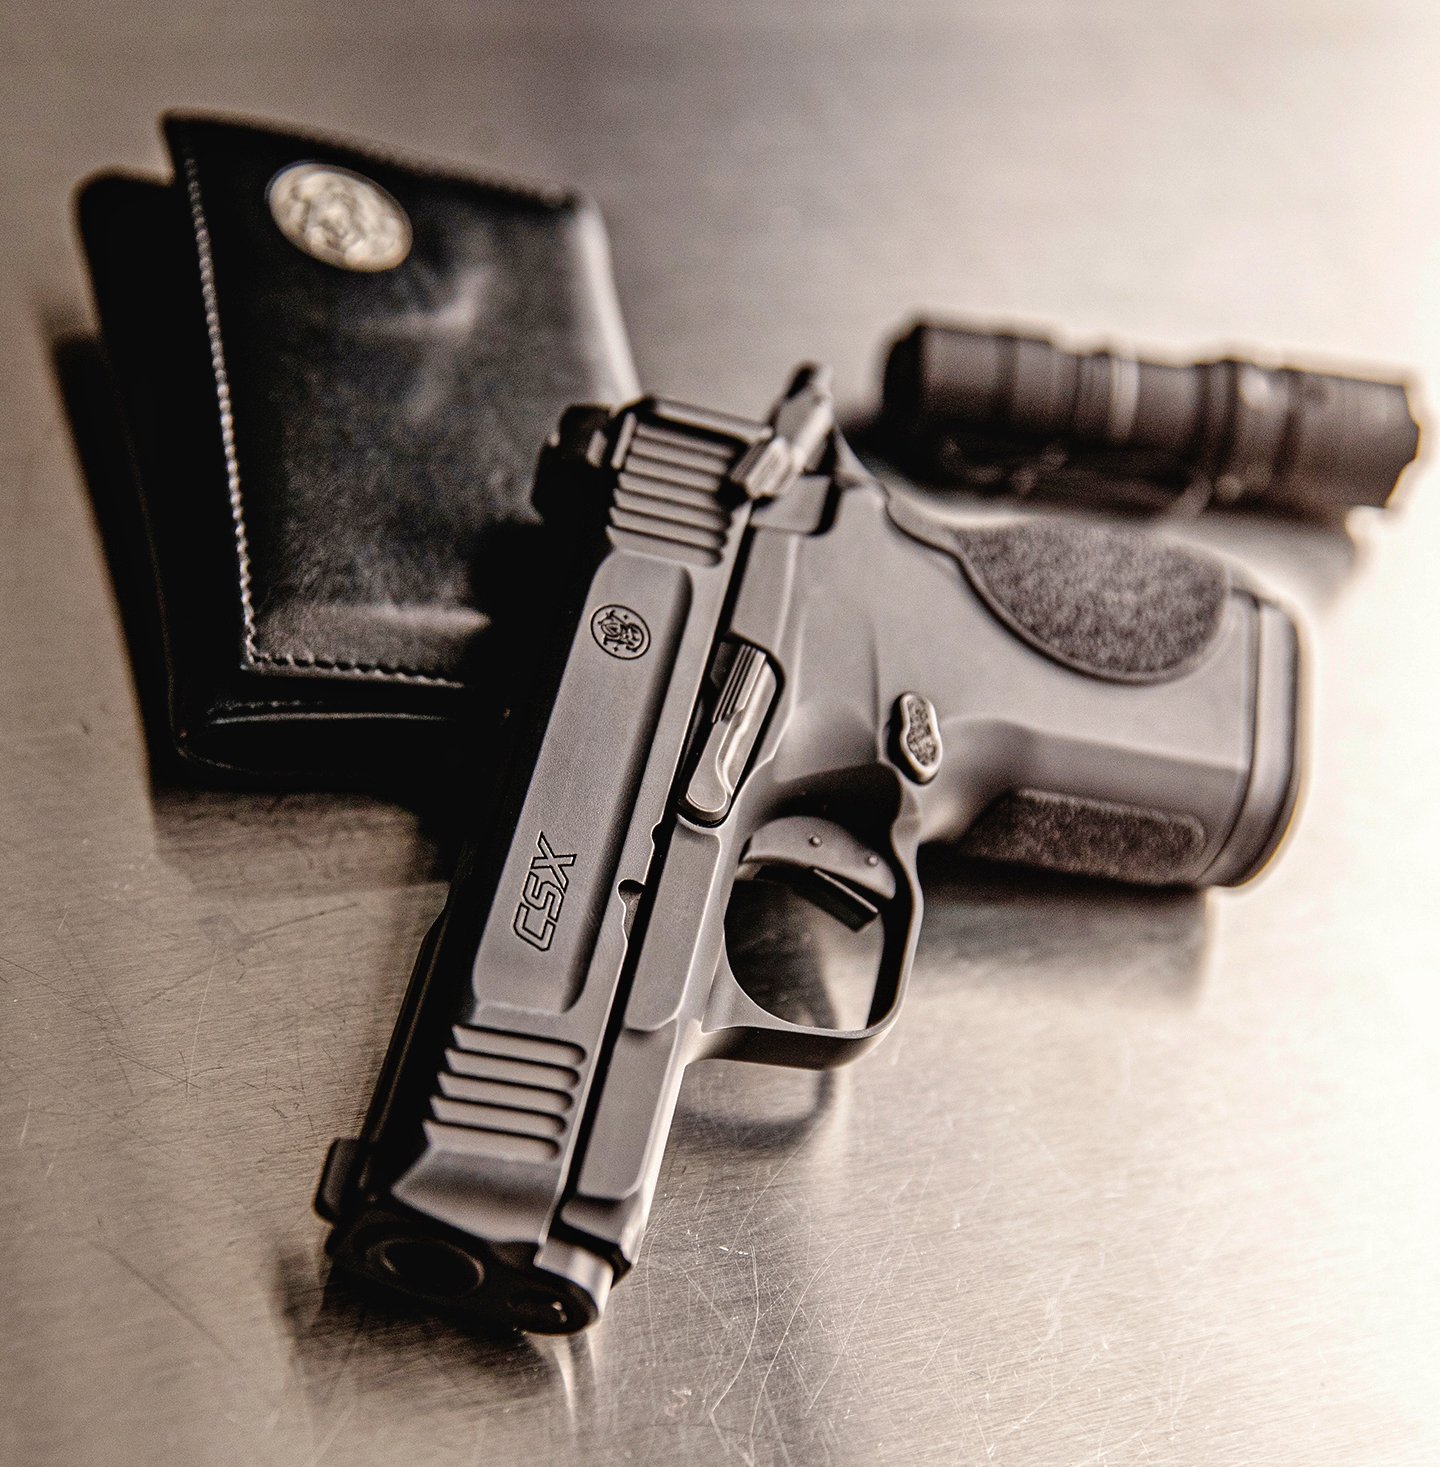 Smith and Wesson's CSX is a a hammer-fired, all-metal pistol. 